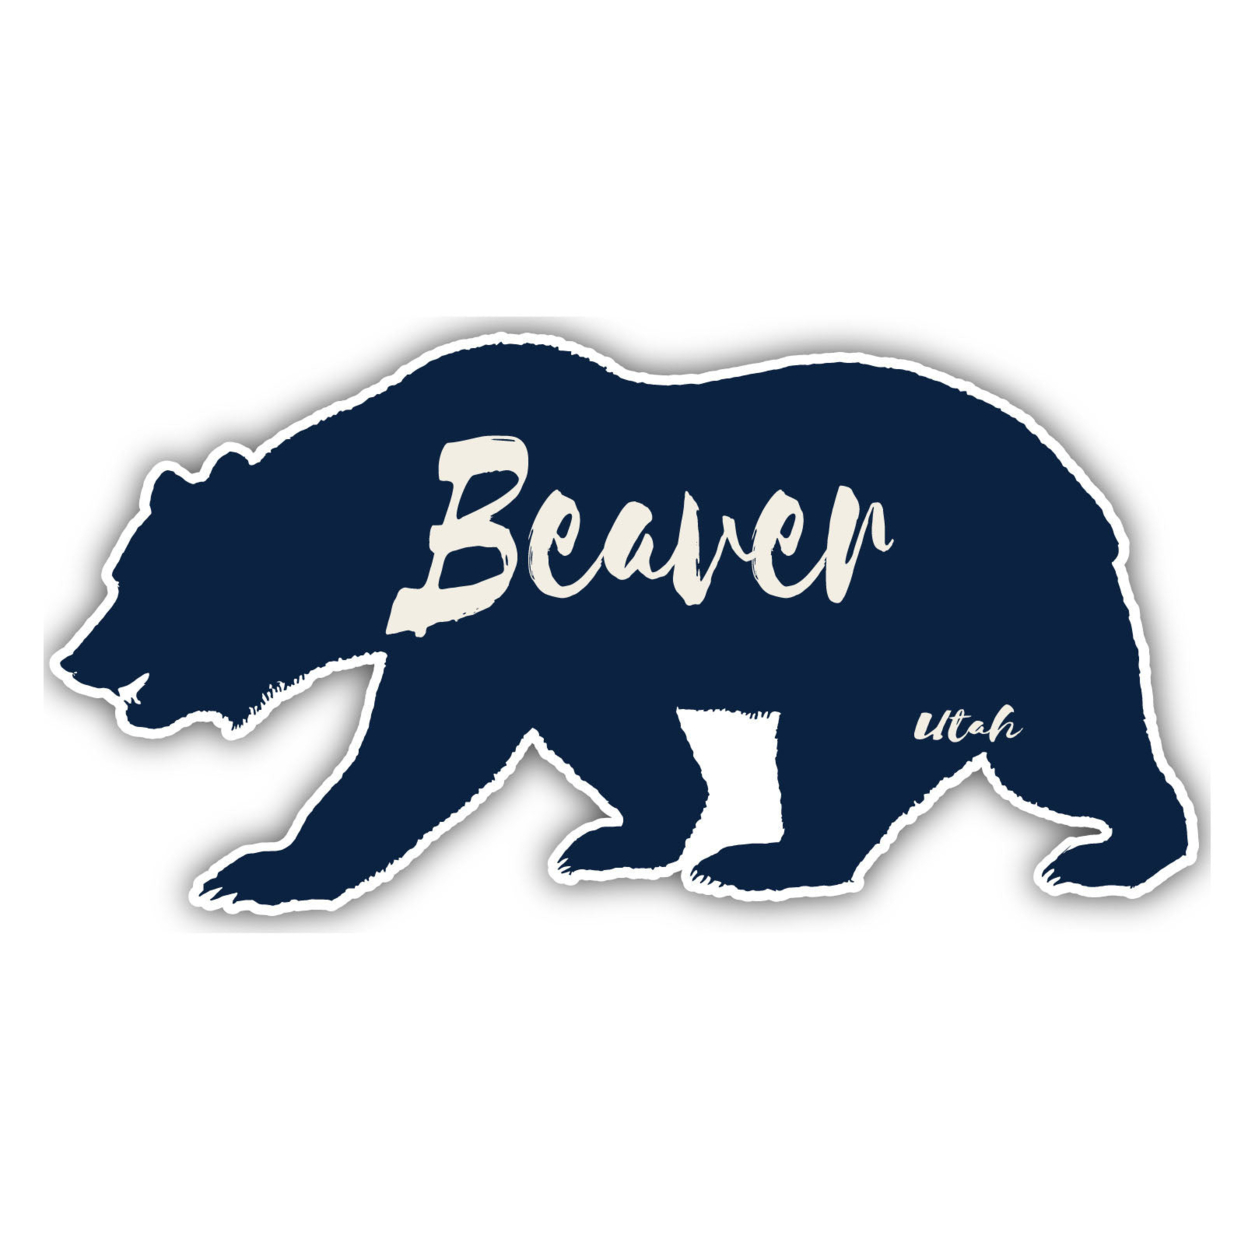 Beaver Utah Souvenir Decorative Stickers (Choose Theme And Size) - 4-Pack, 8-Inch, Tent